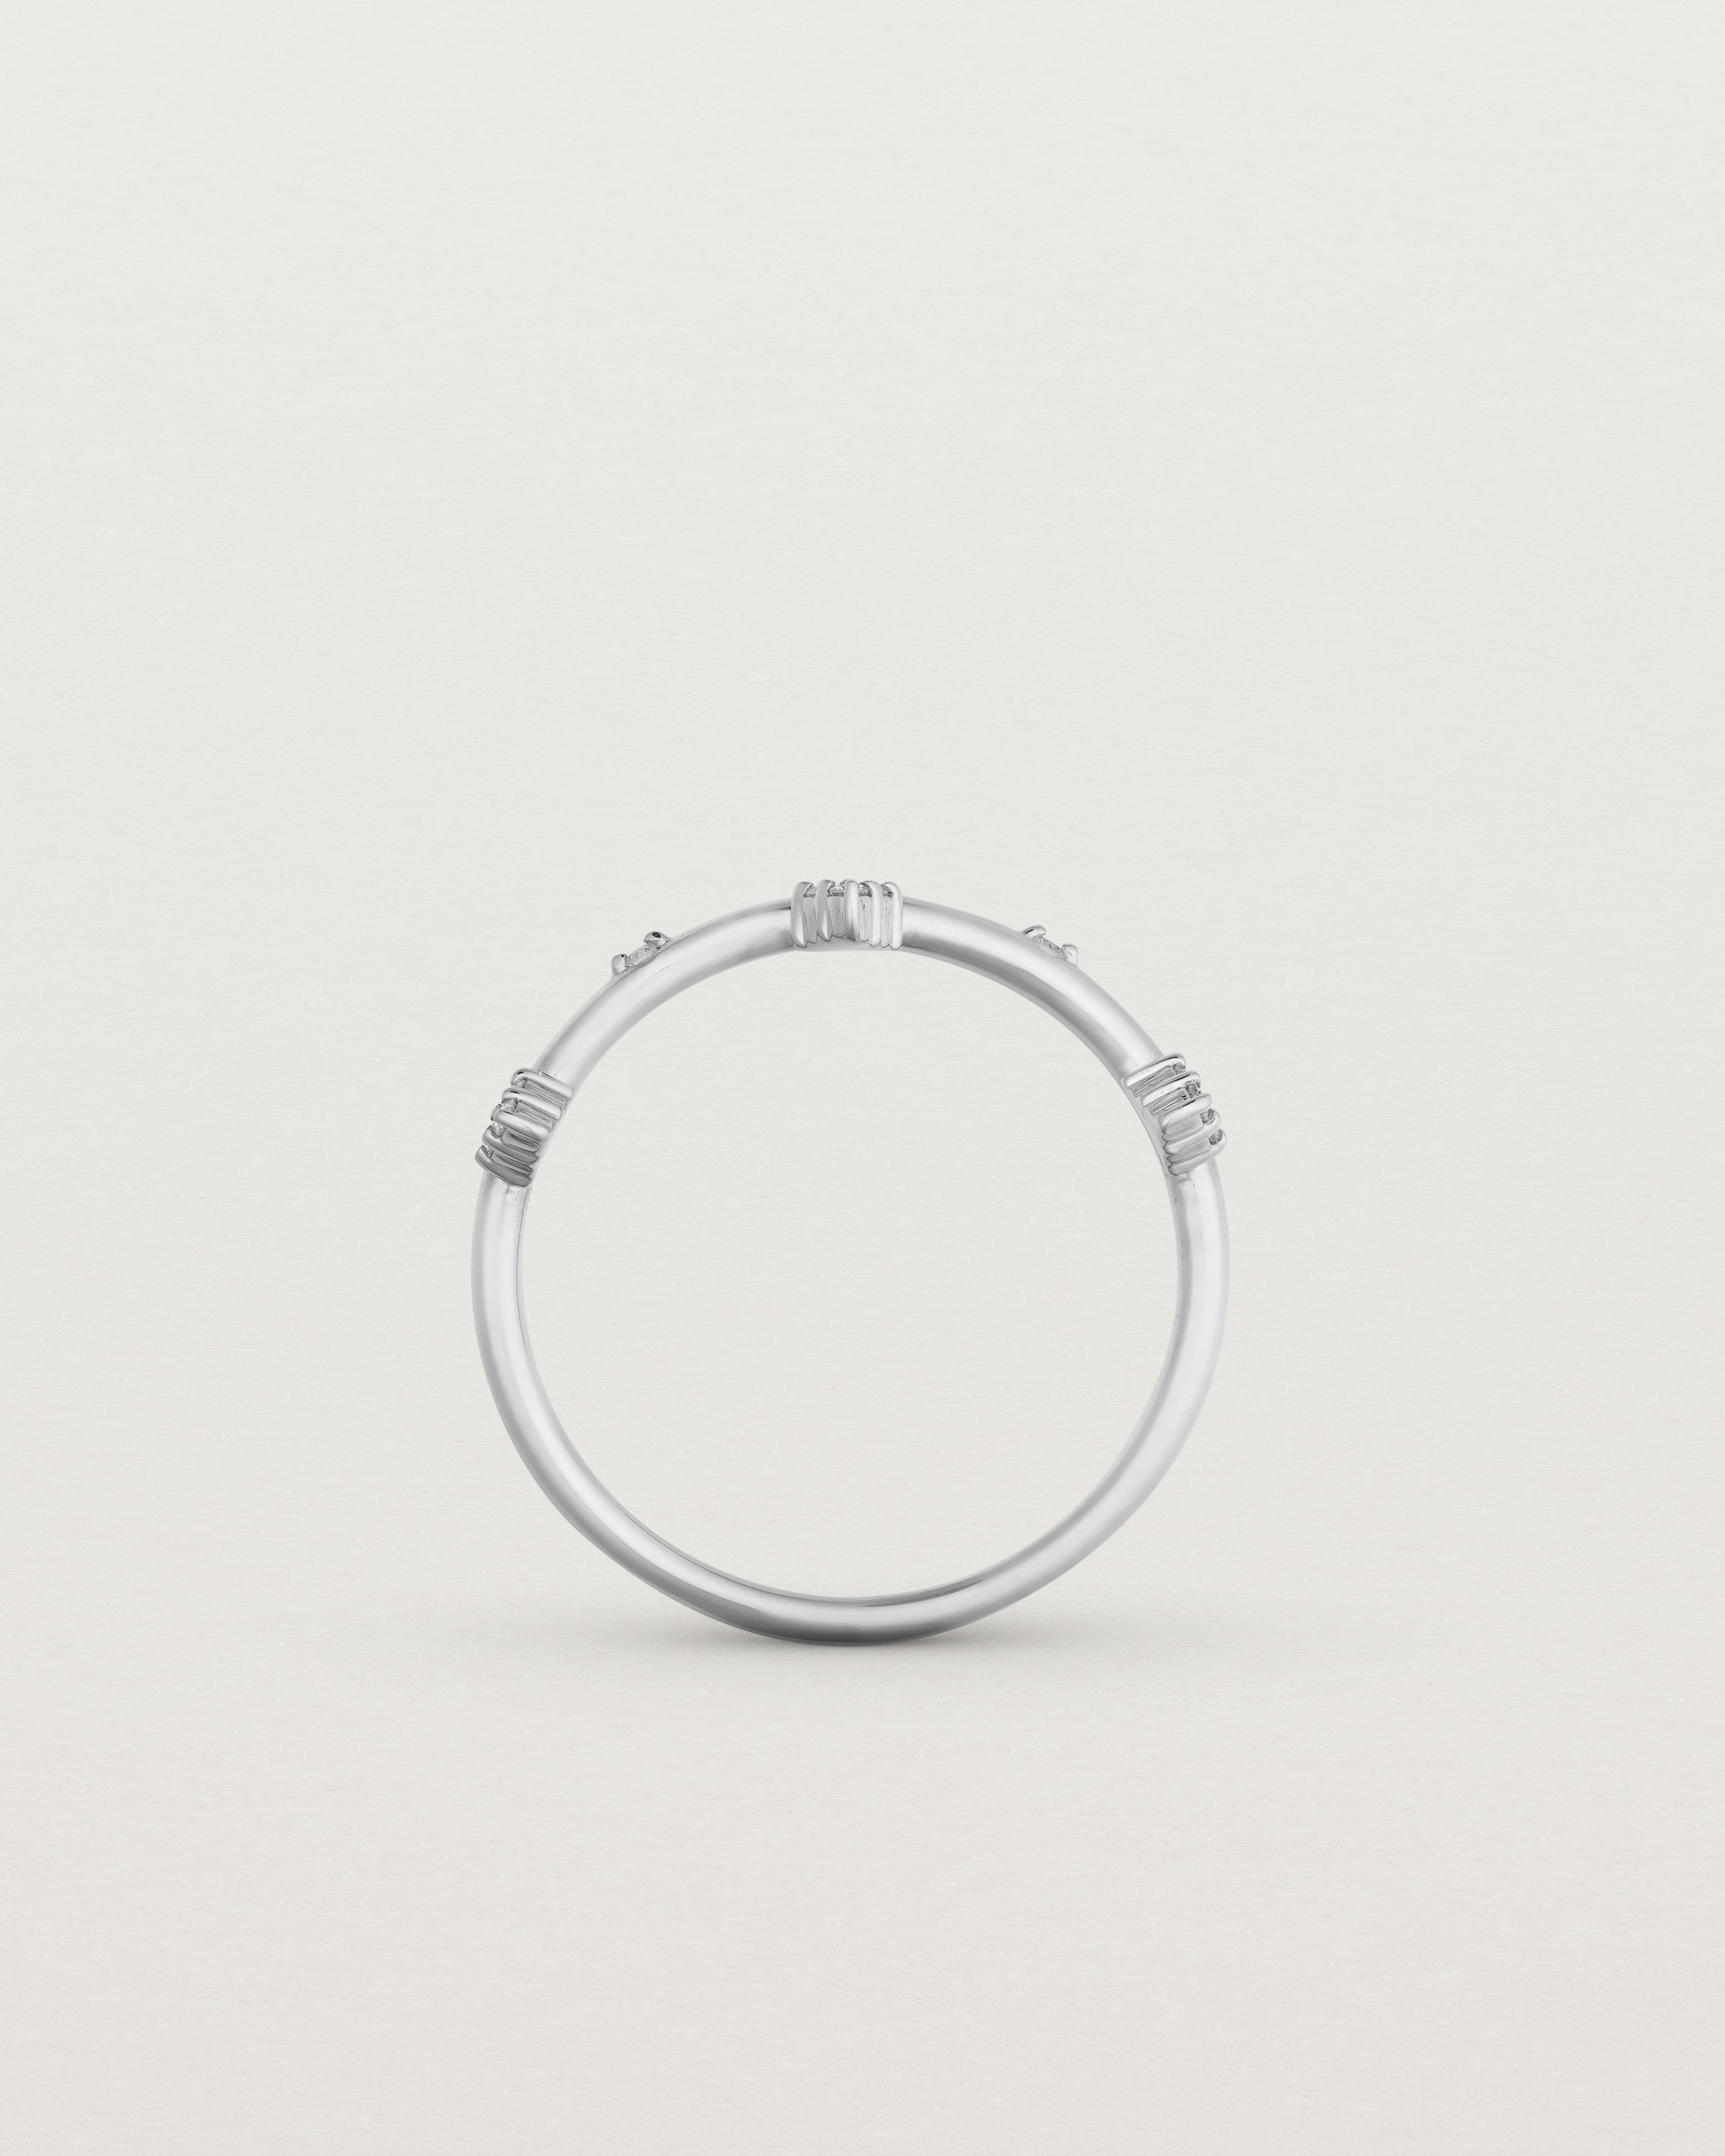 Standing view of the Belle Ring | Diamonds in white gold.